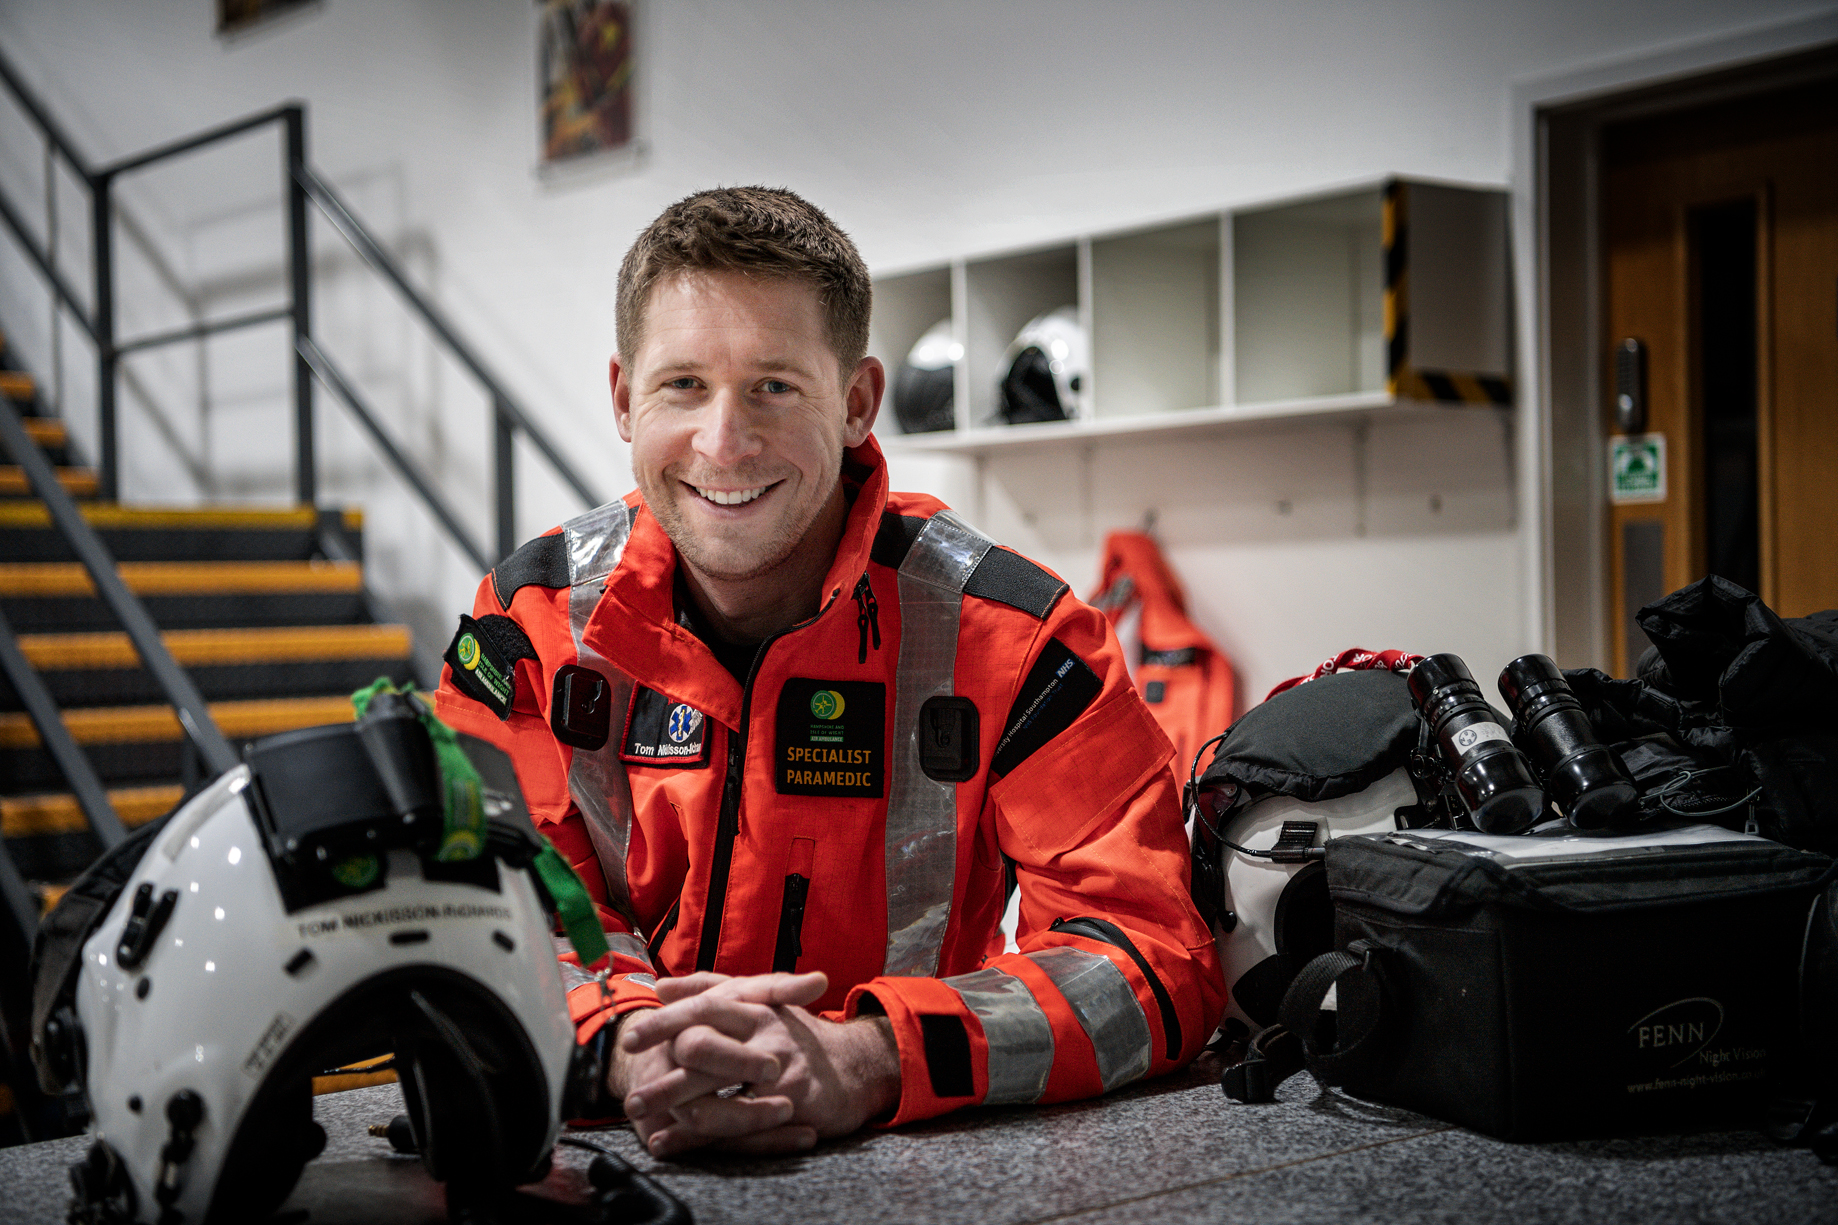 Specialist Paramedic Tom is in his flight suit in the hanger, smiling at to the camera. His flight helmet is to the side.